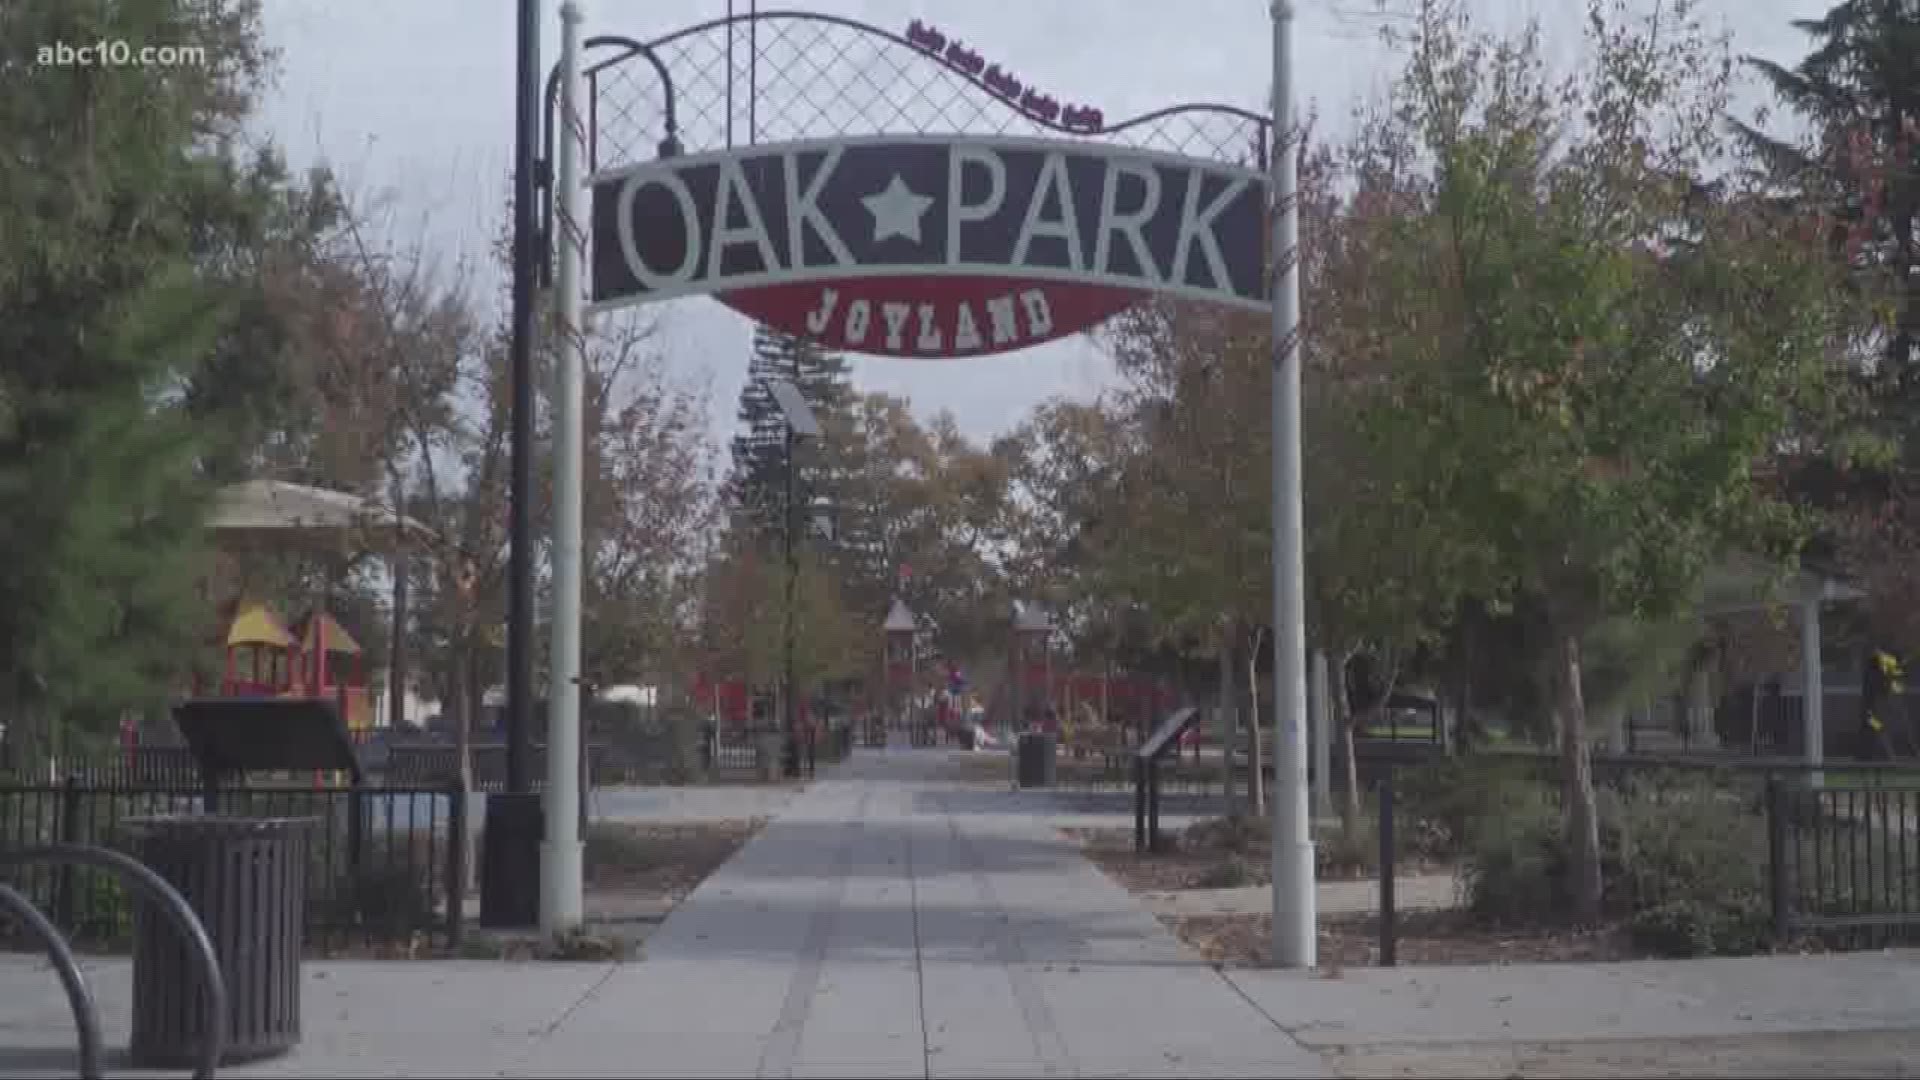 ABC10's Keristen Holmes delves into whether updates in the Sacramento neighborhood Oak Park are signs of gentrification and the effect on the community.